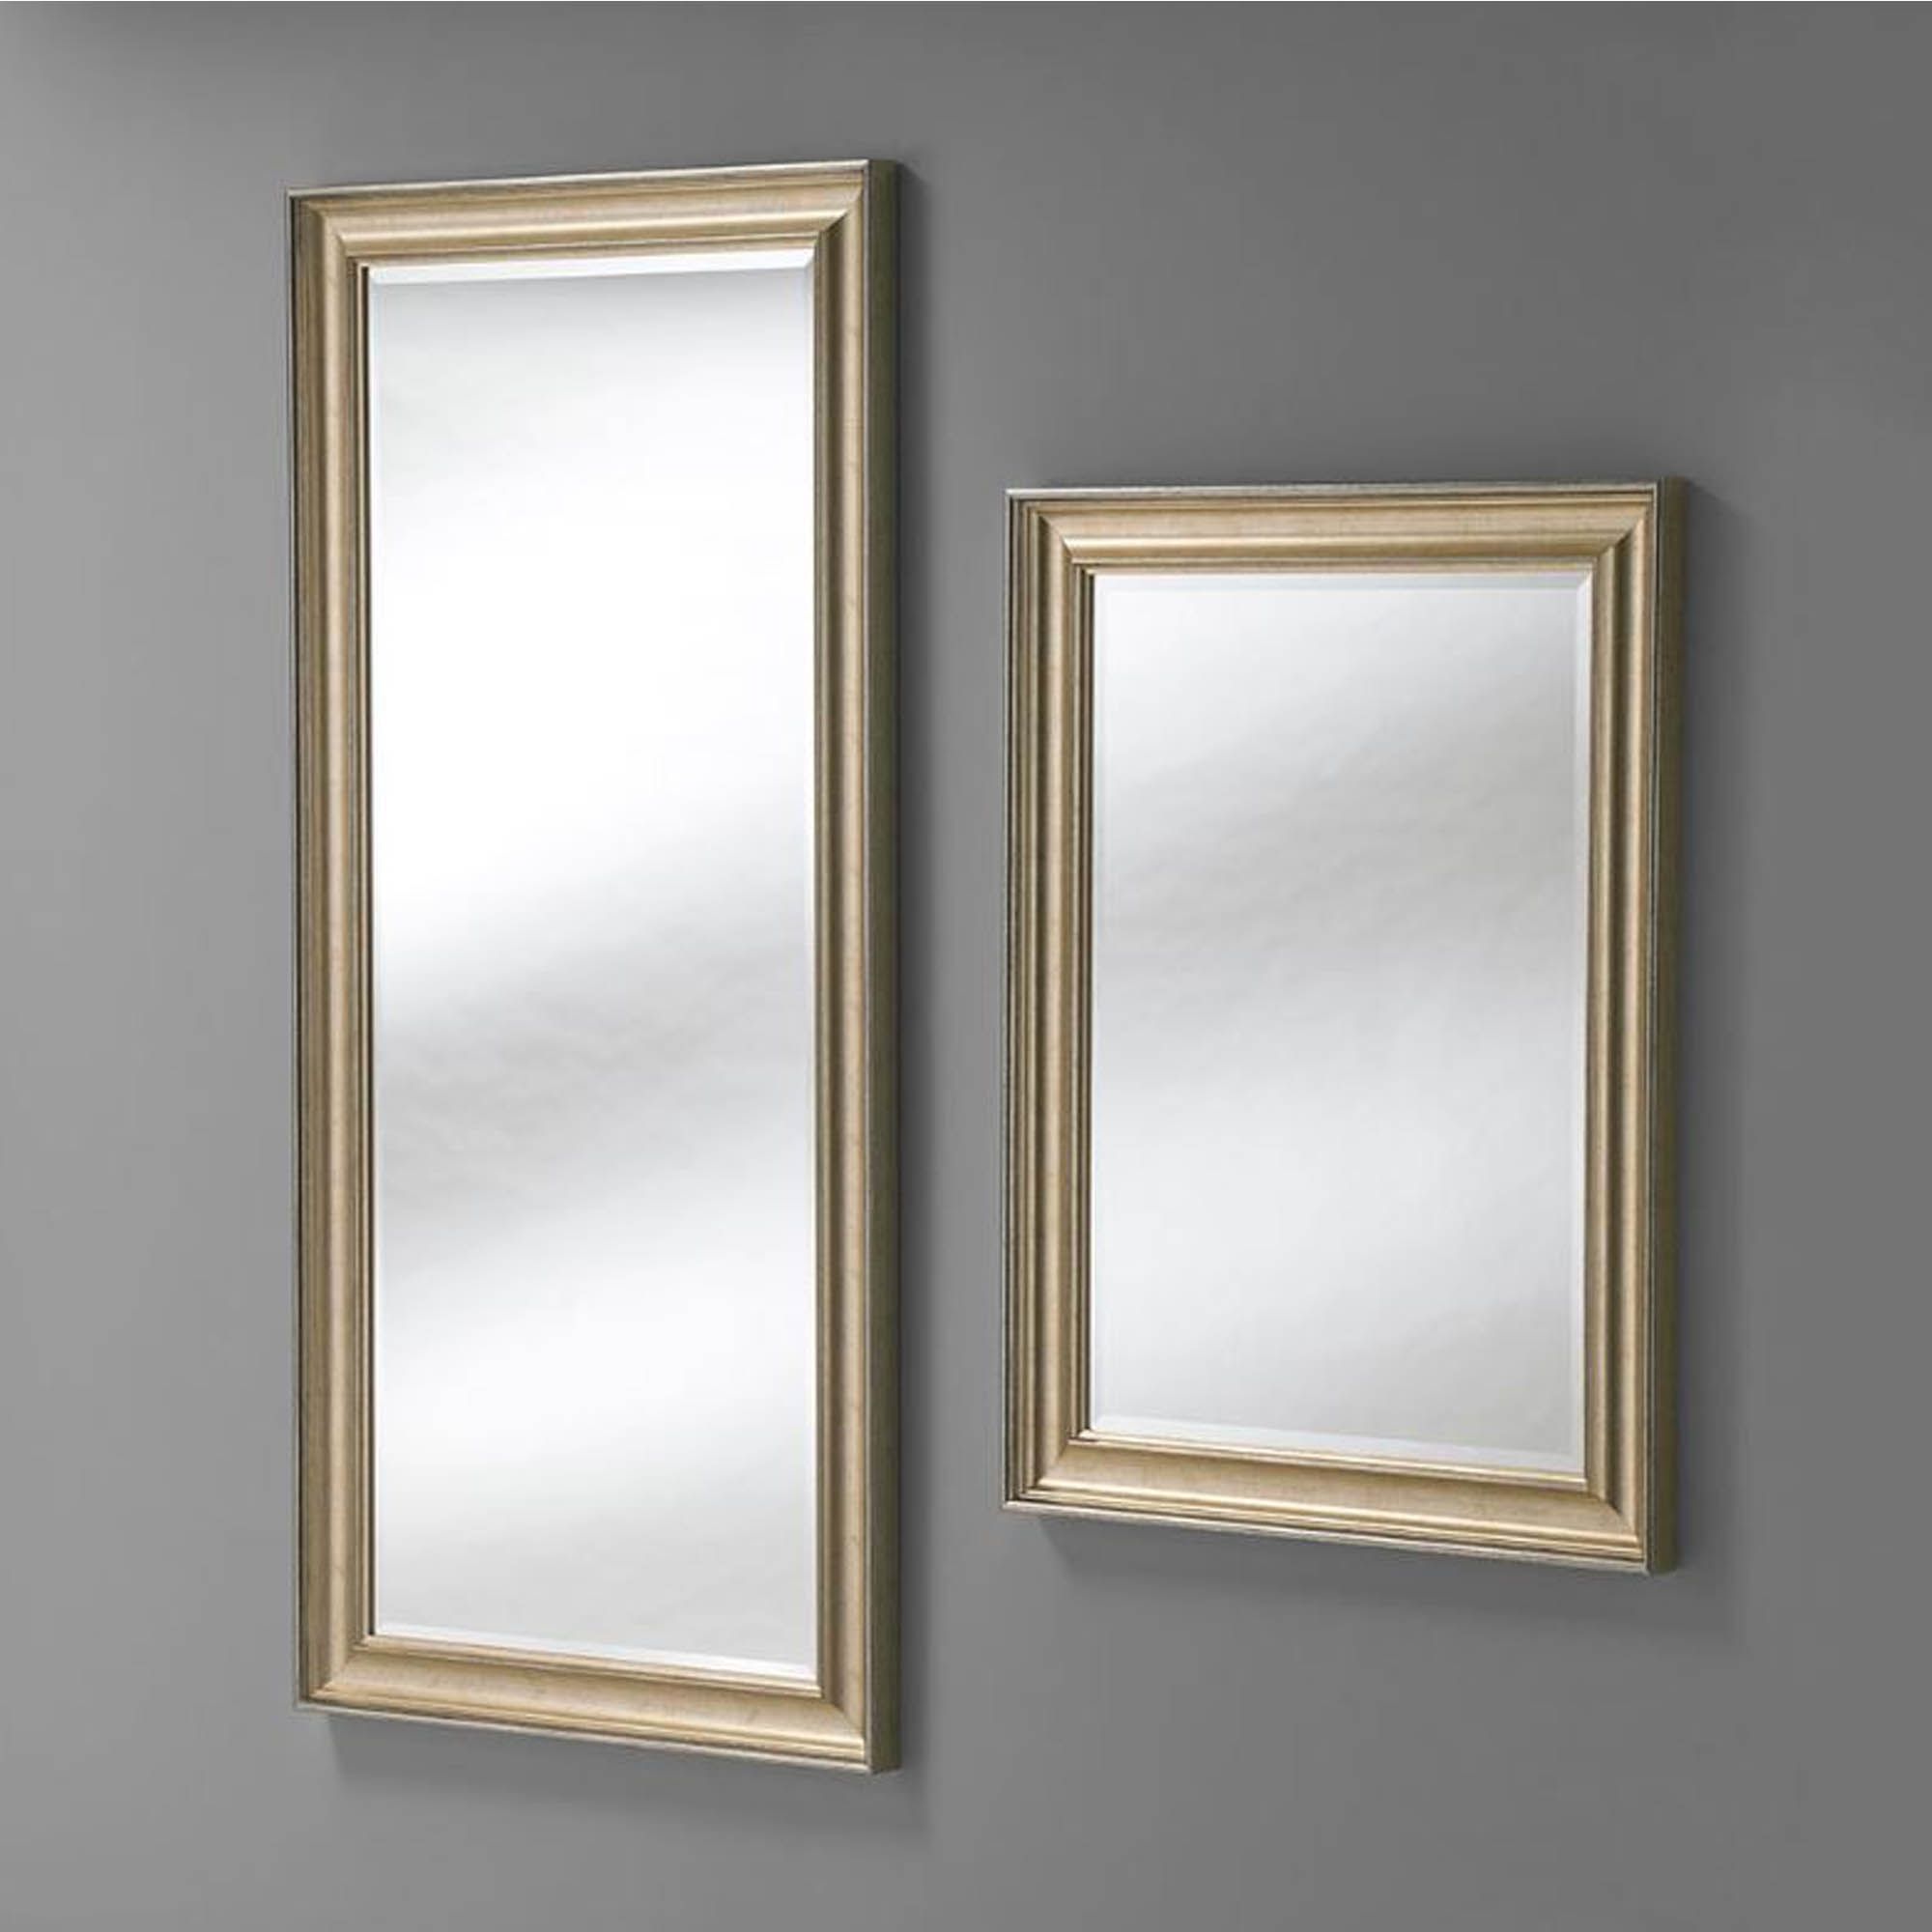 Homesdirect365 Throughout Widely Used Bevel Edge Rectangular Wall Mirrors (View 7 of 15)